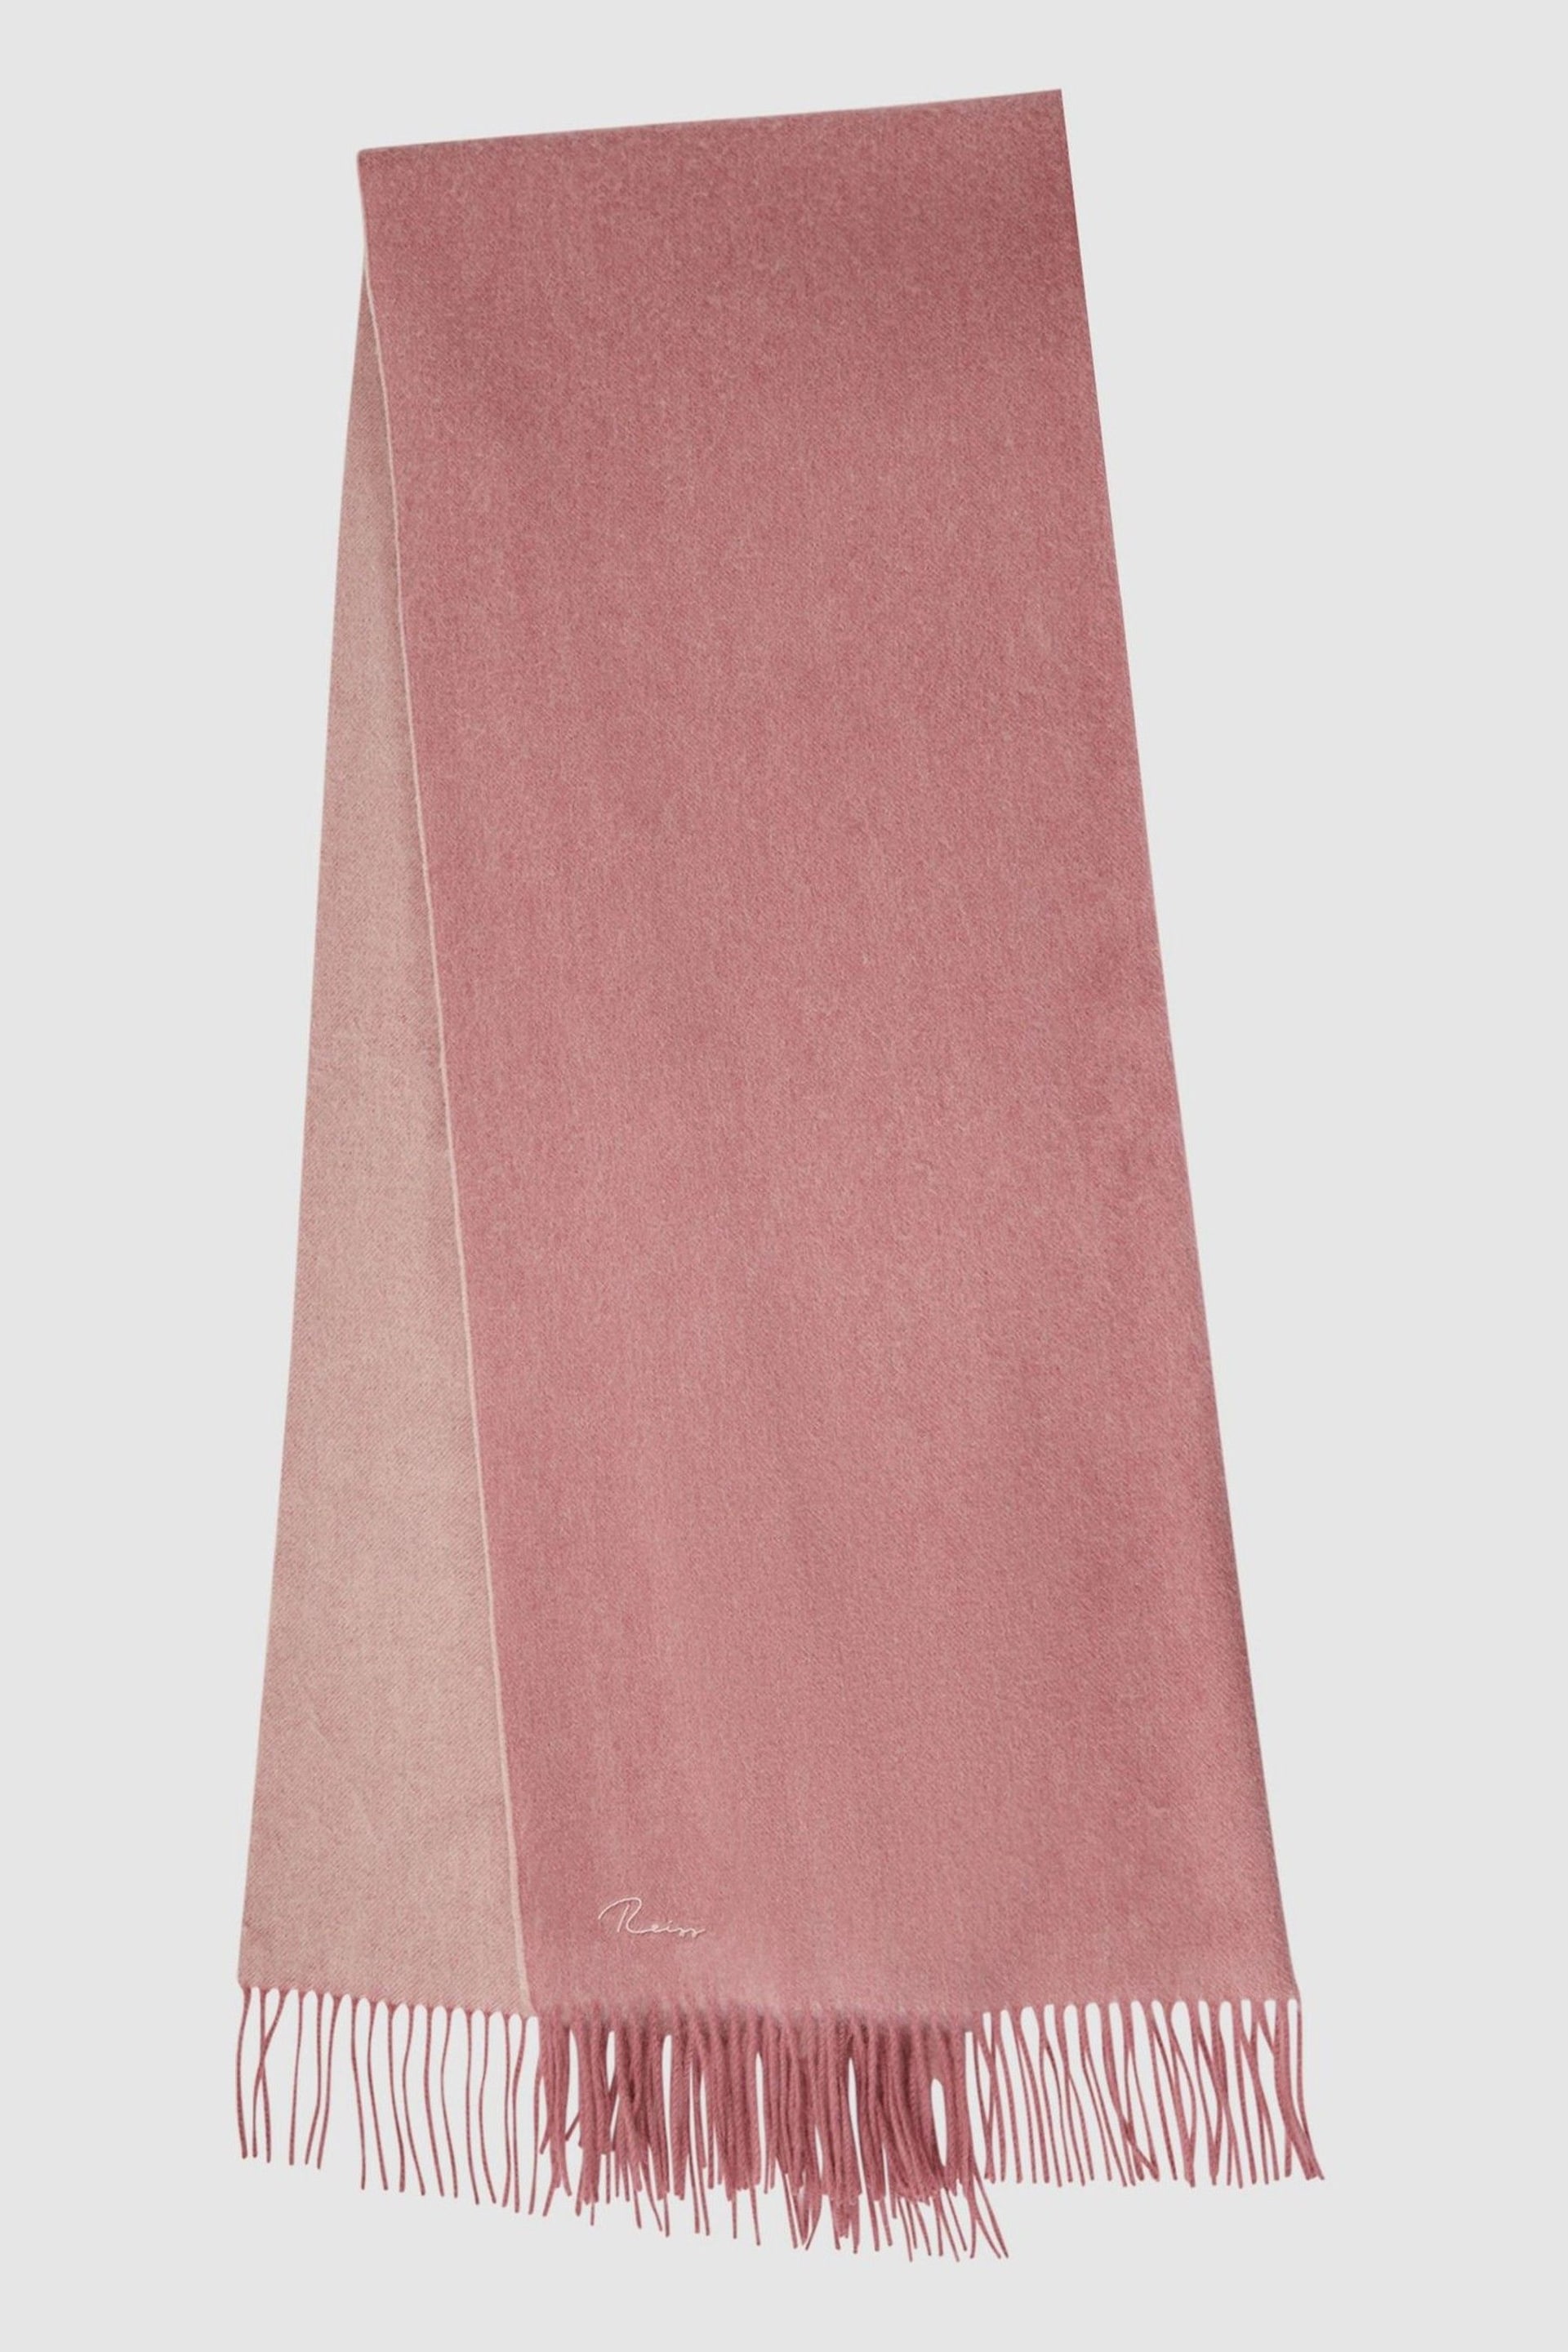 Reiss Blush Picton Wool-Cashmere Scarf - Image 1 of 5